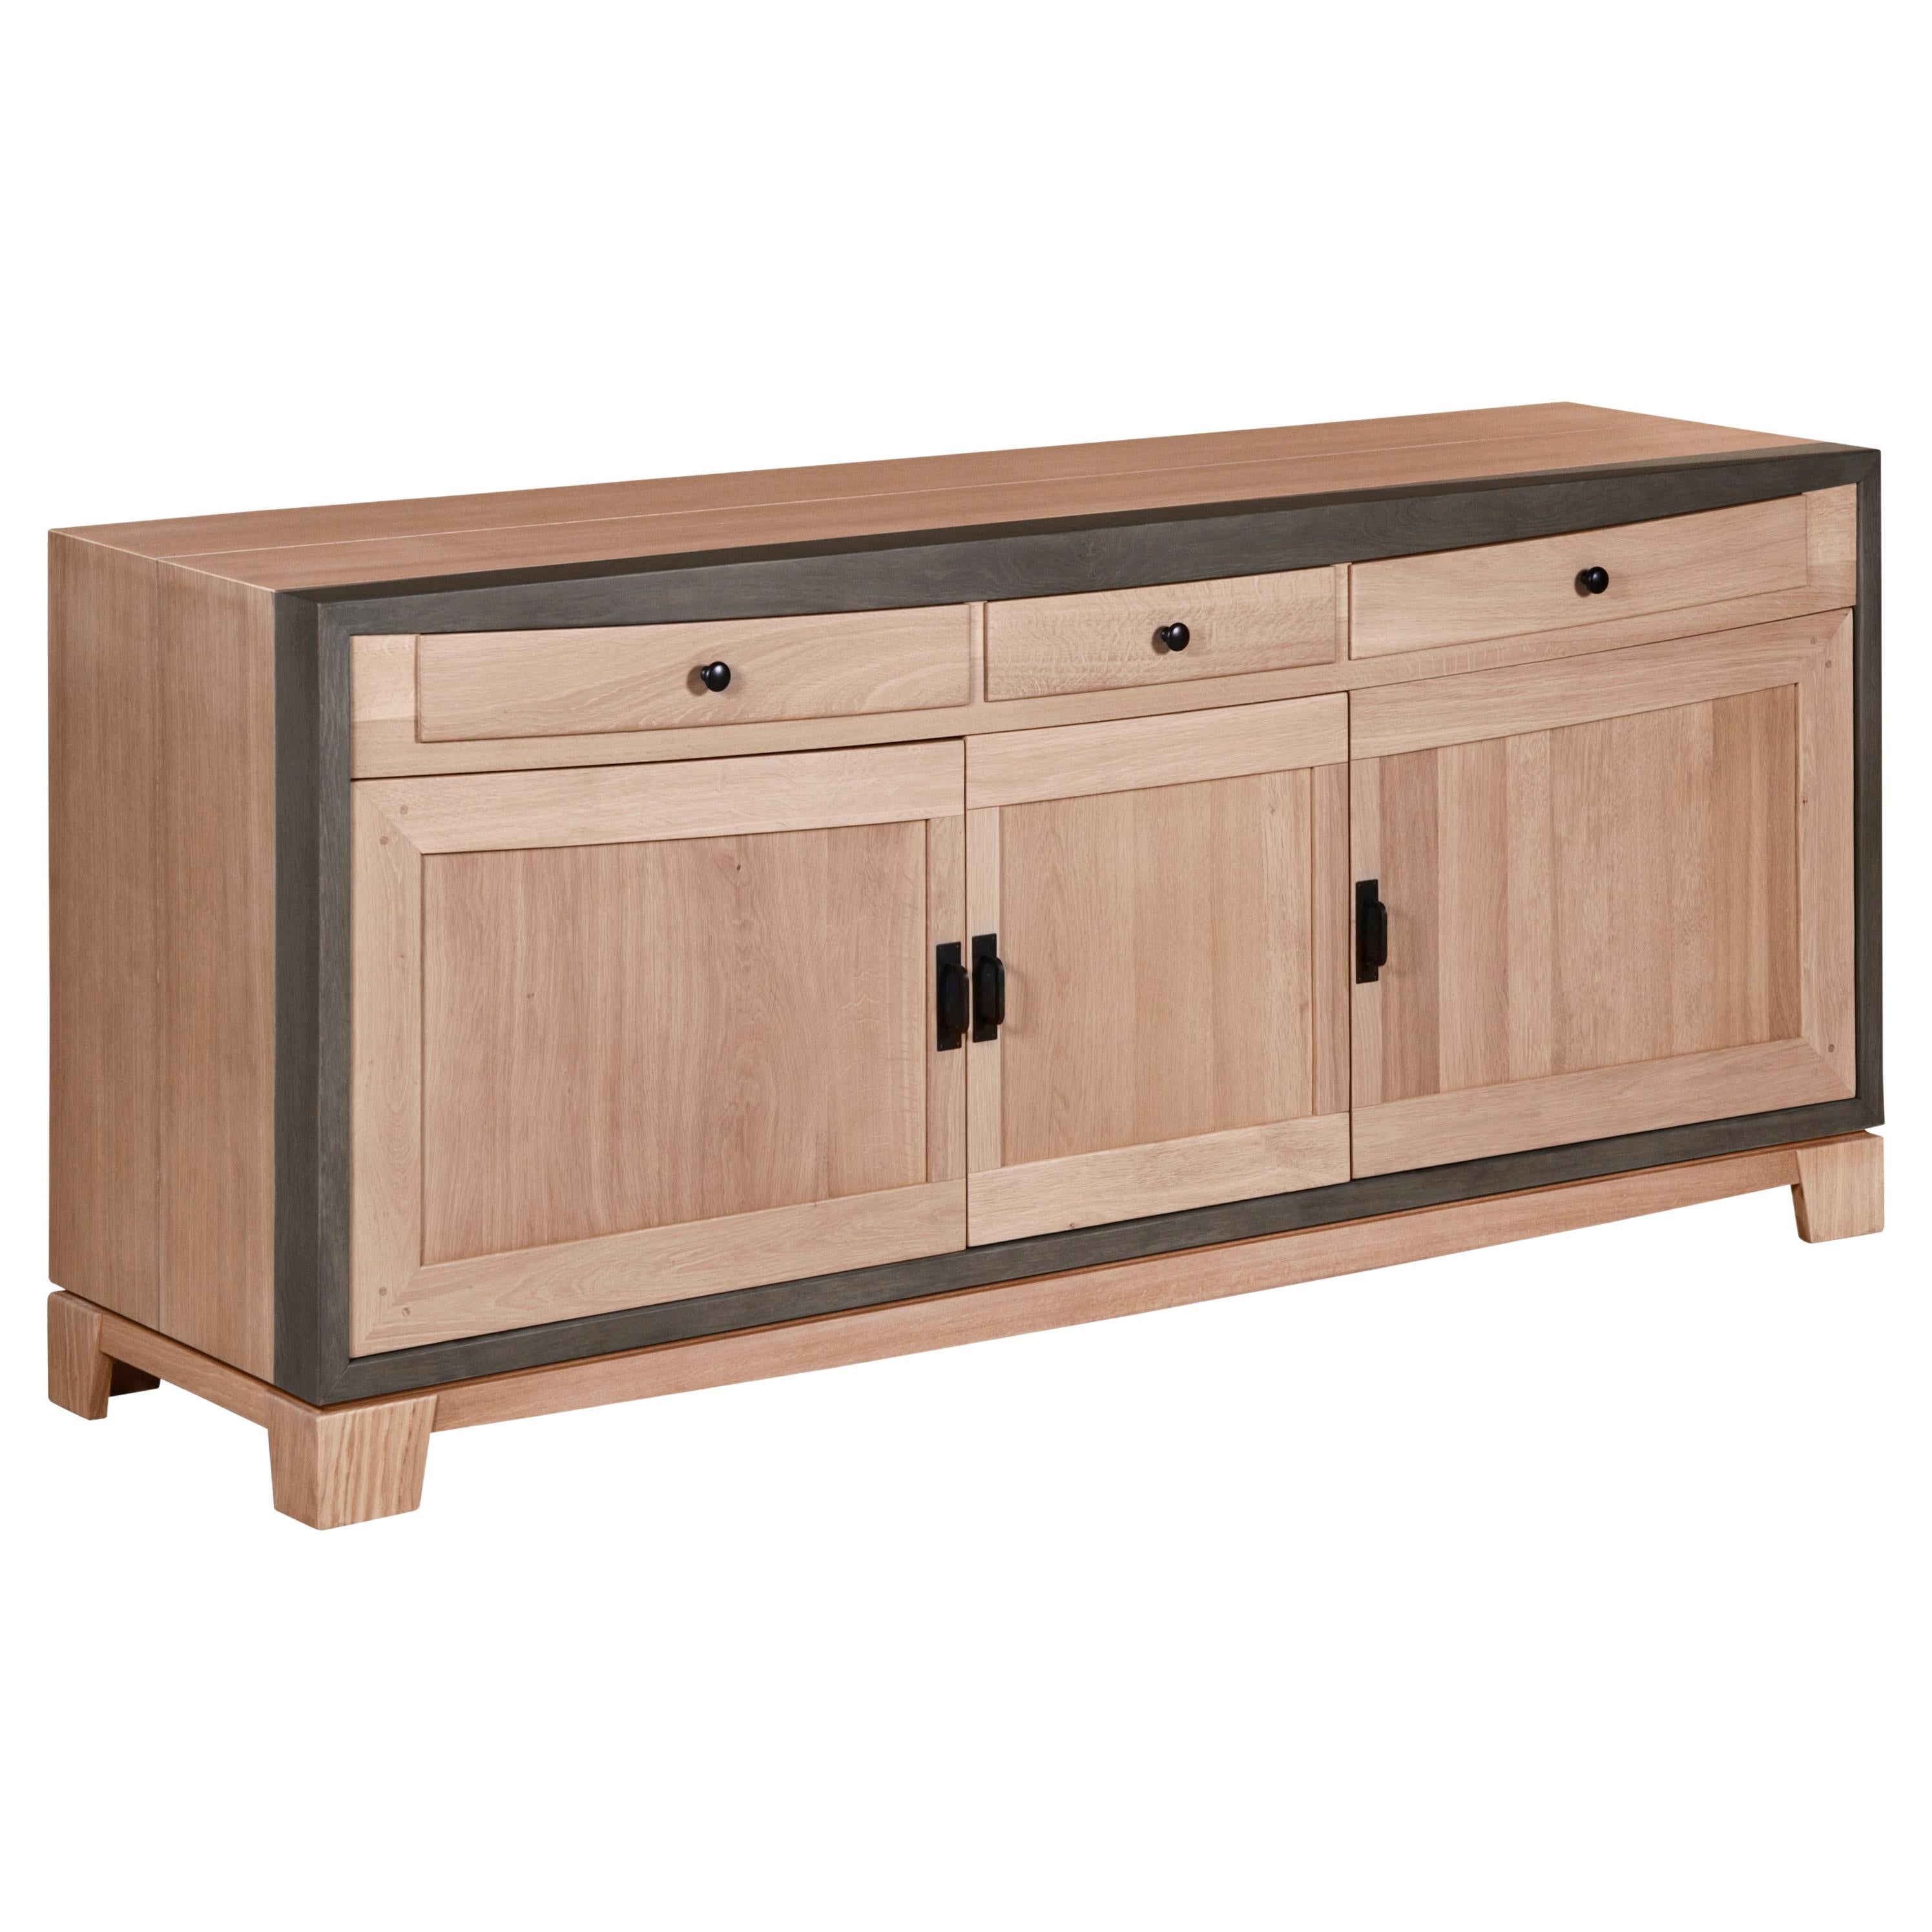 3-Door Sideboard with 3 Drawers in Natural Solid Oak, 100% Made in France